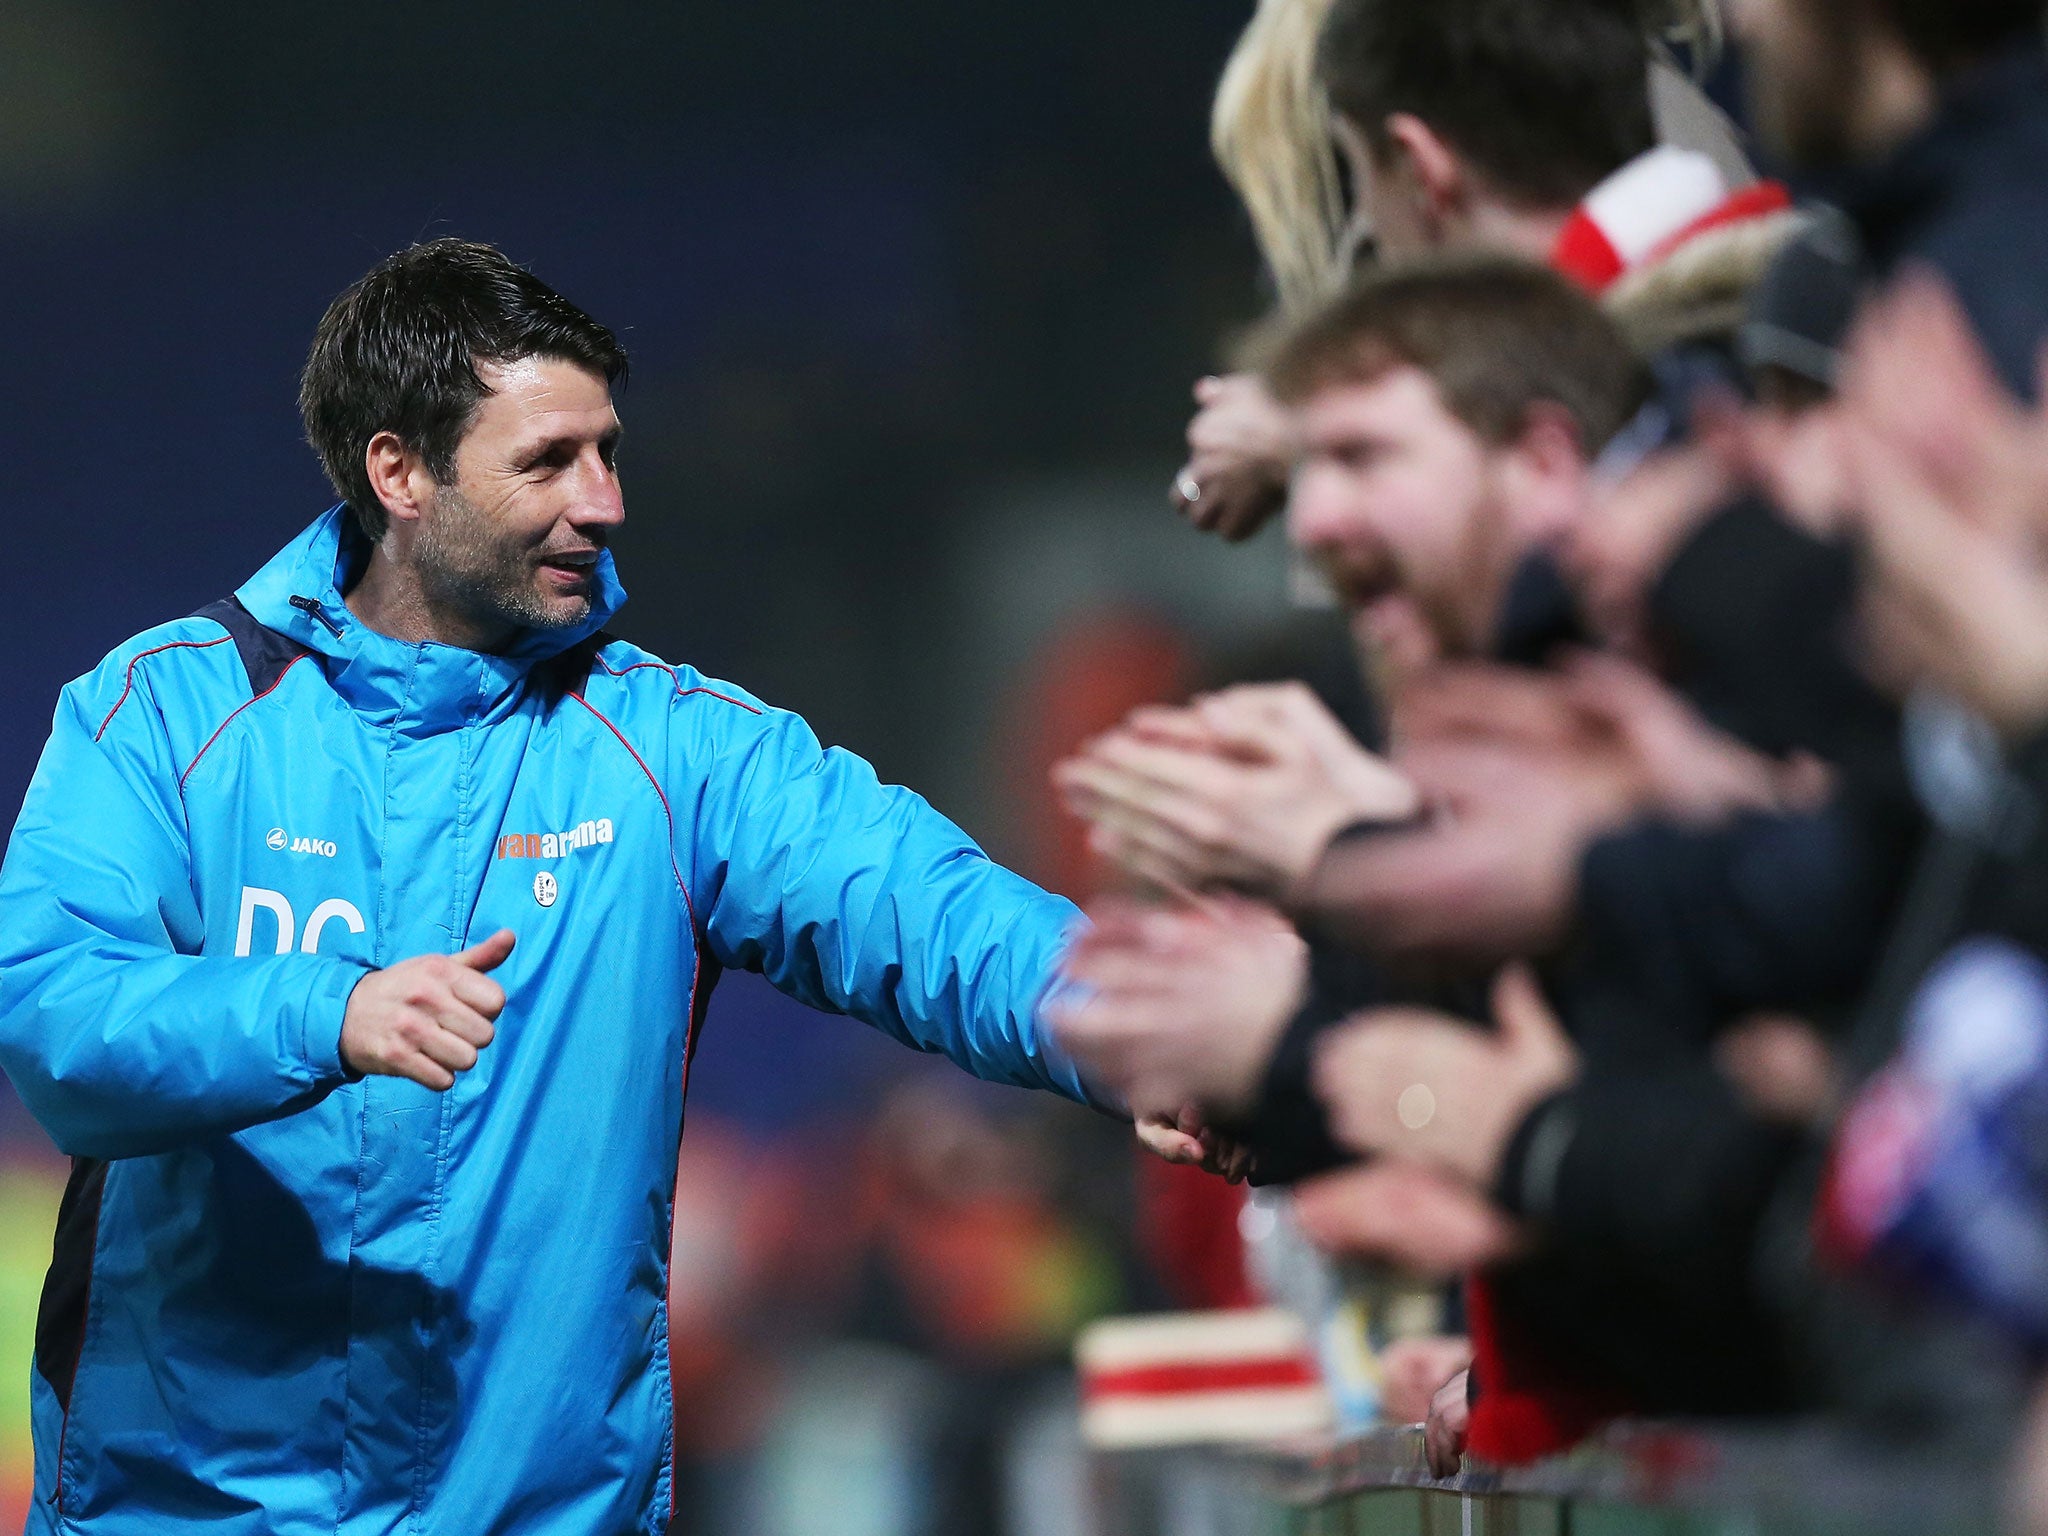 Danny Cowley with Lincoln fans after his side's FA Cup victory over Ipswich